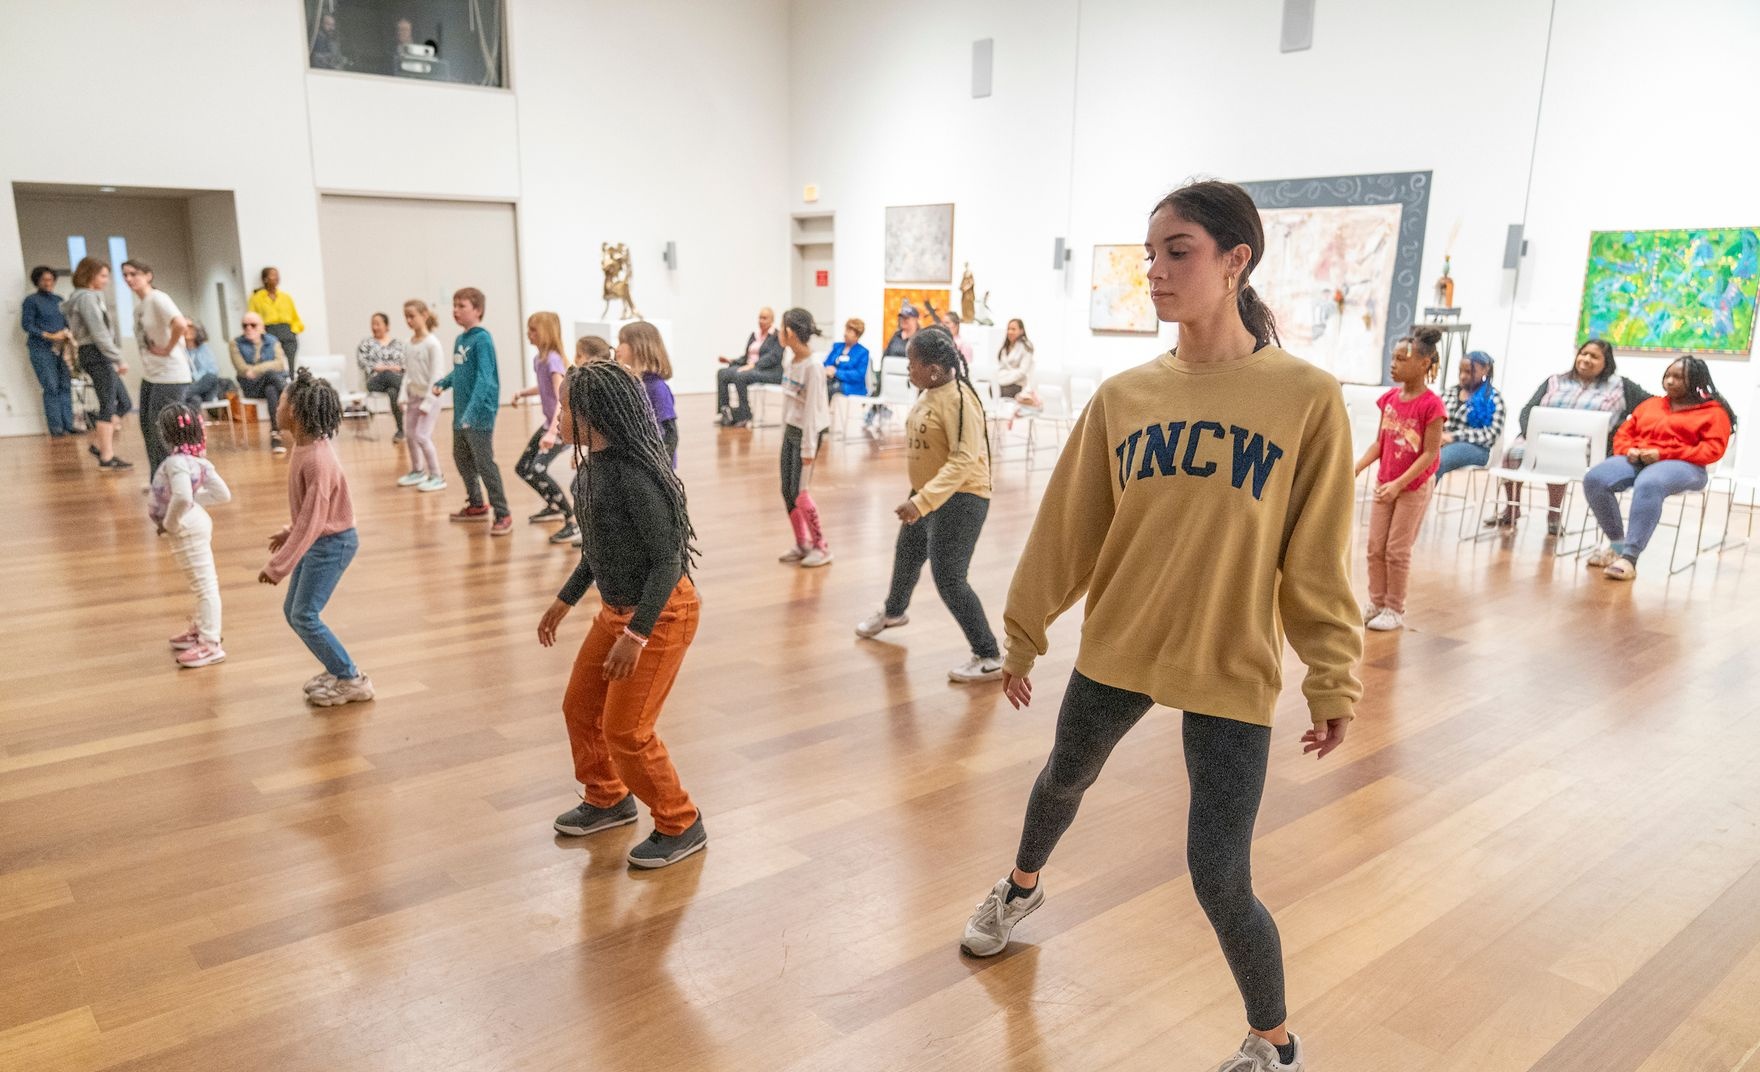 UNCW Student joins youth participants in dance during class